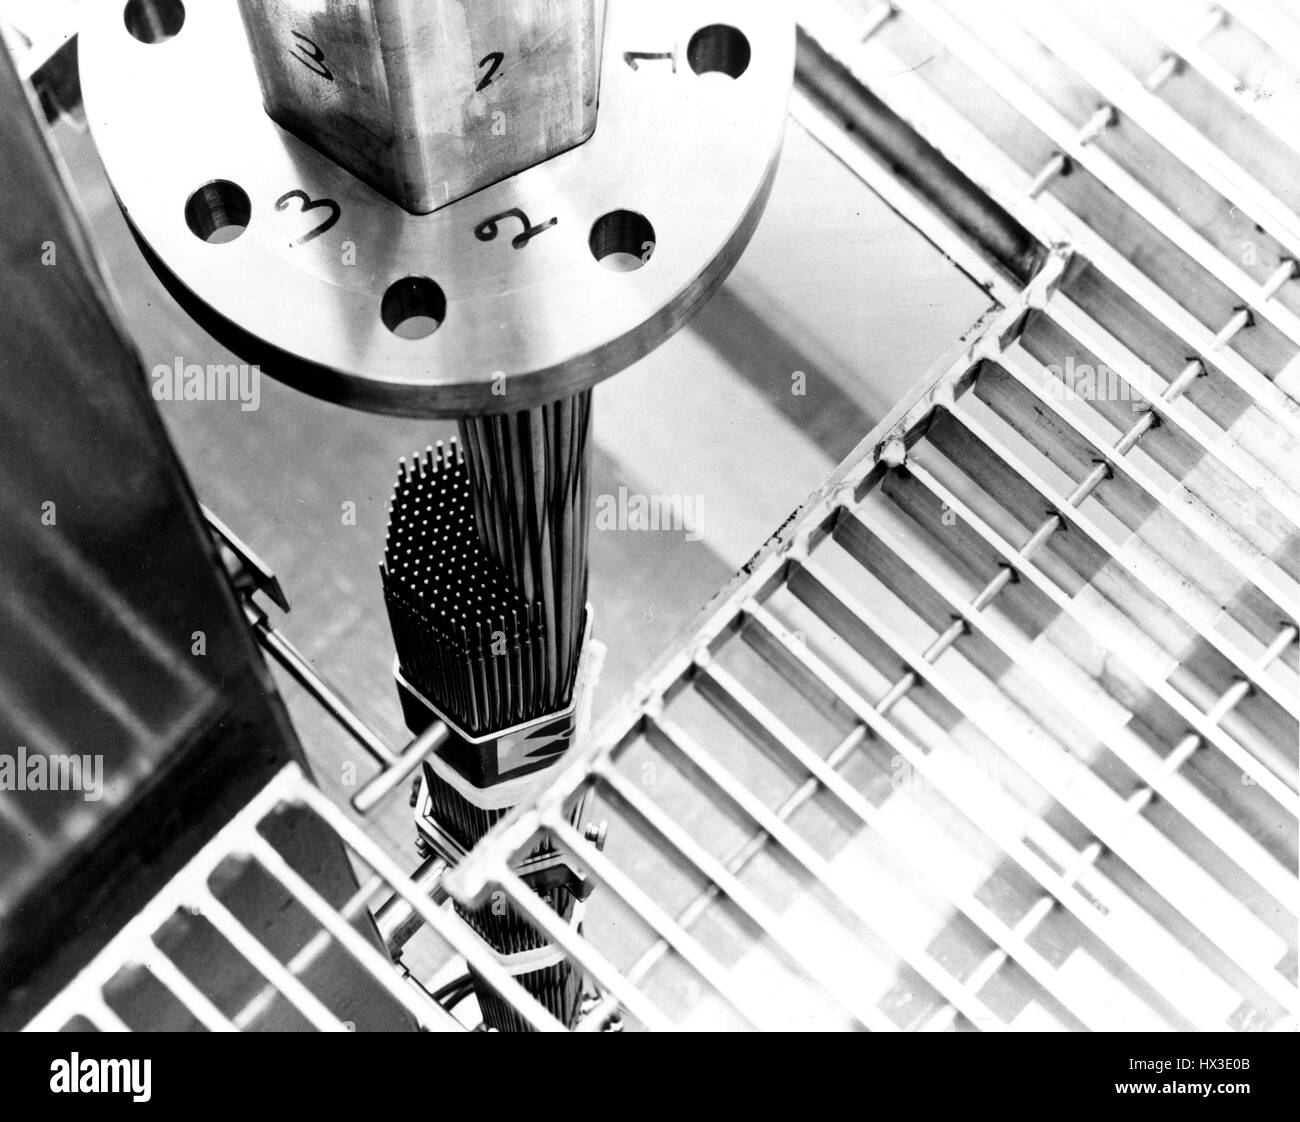 Fuel assembly tests conducted at Hanford Engineering Lab, Washington, 1972. Image courtesy US Department of Energy. Stock Photo